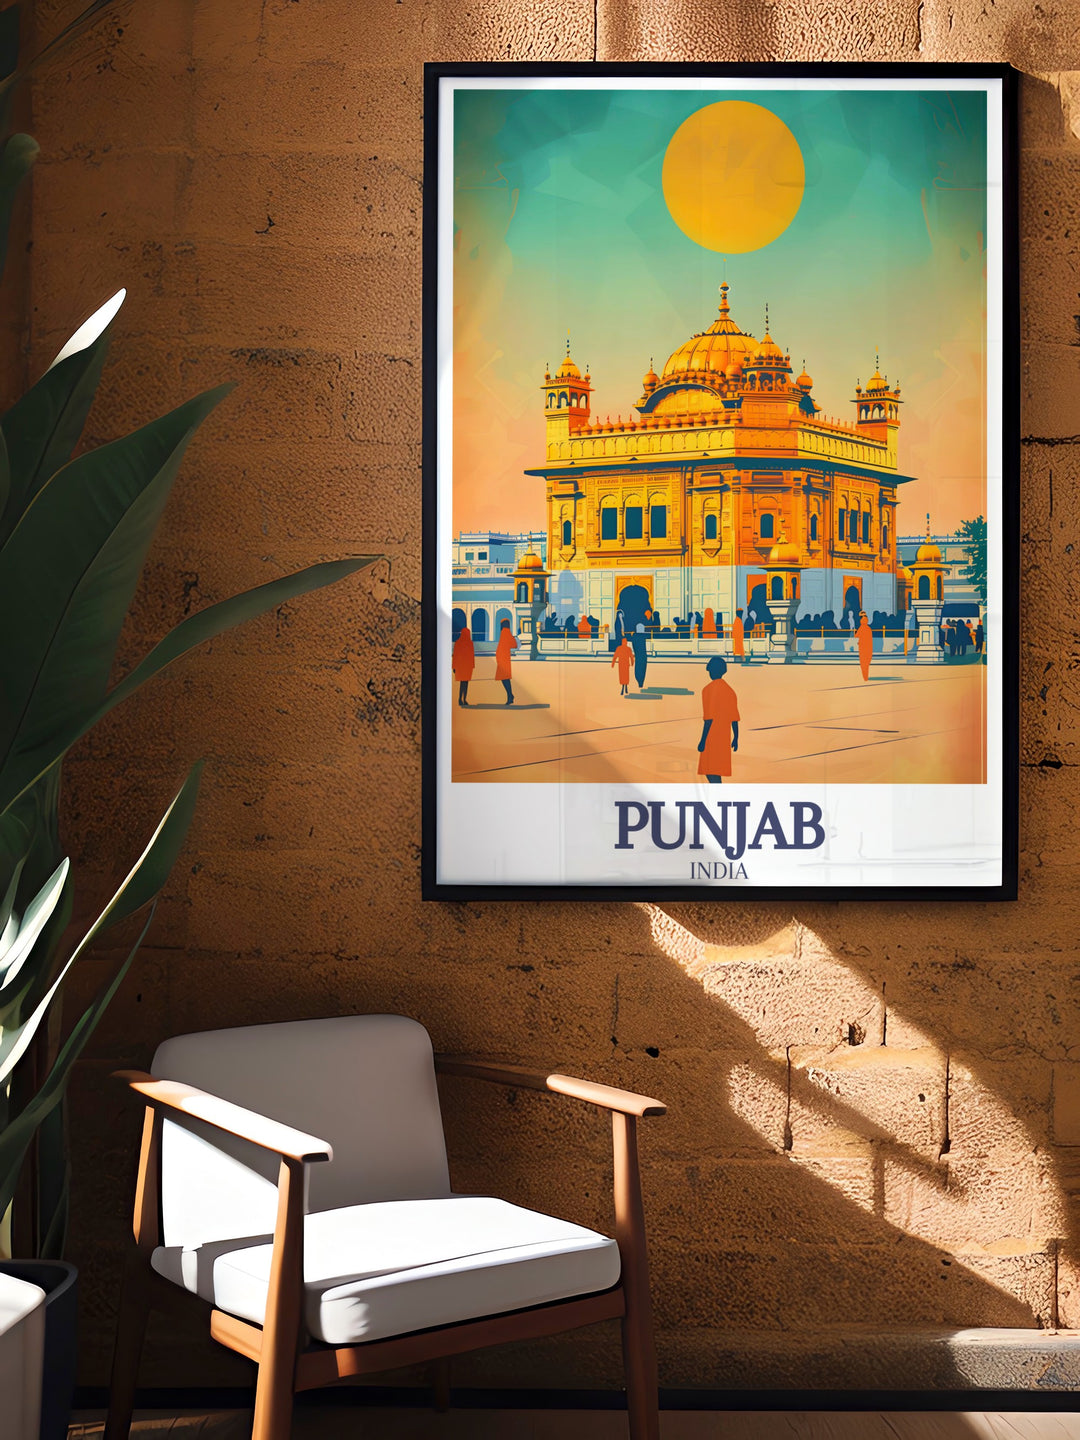 Captivating Golden Temple, Amrit Sarovar prints perfect for bringing a touch of Indian heritage into your home or office highlighting the spiritual and architectural splendor of this iconic landmark.